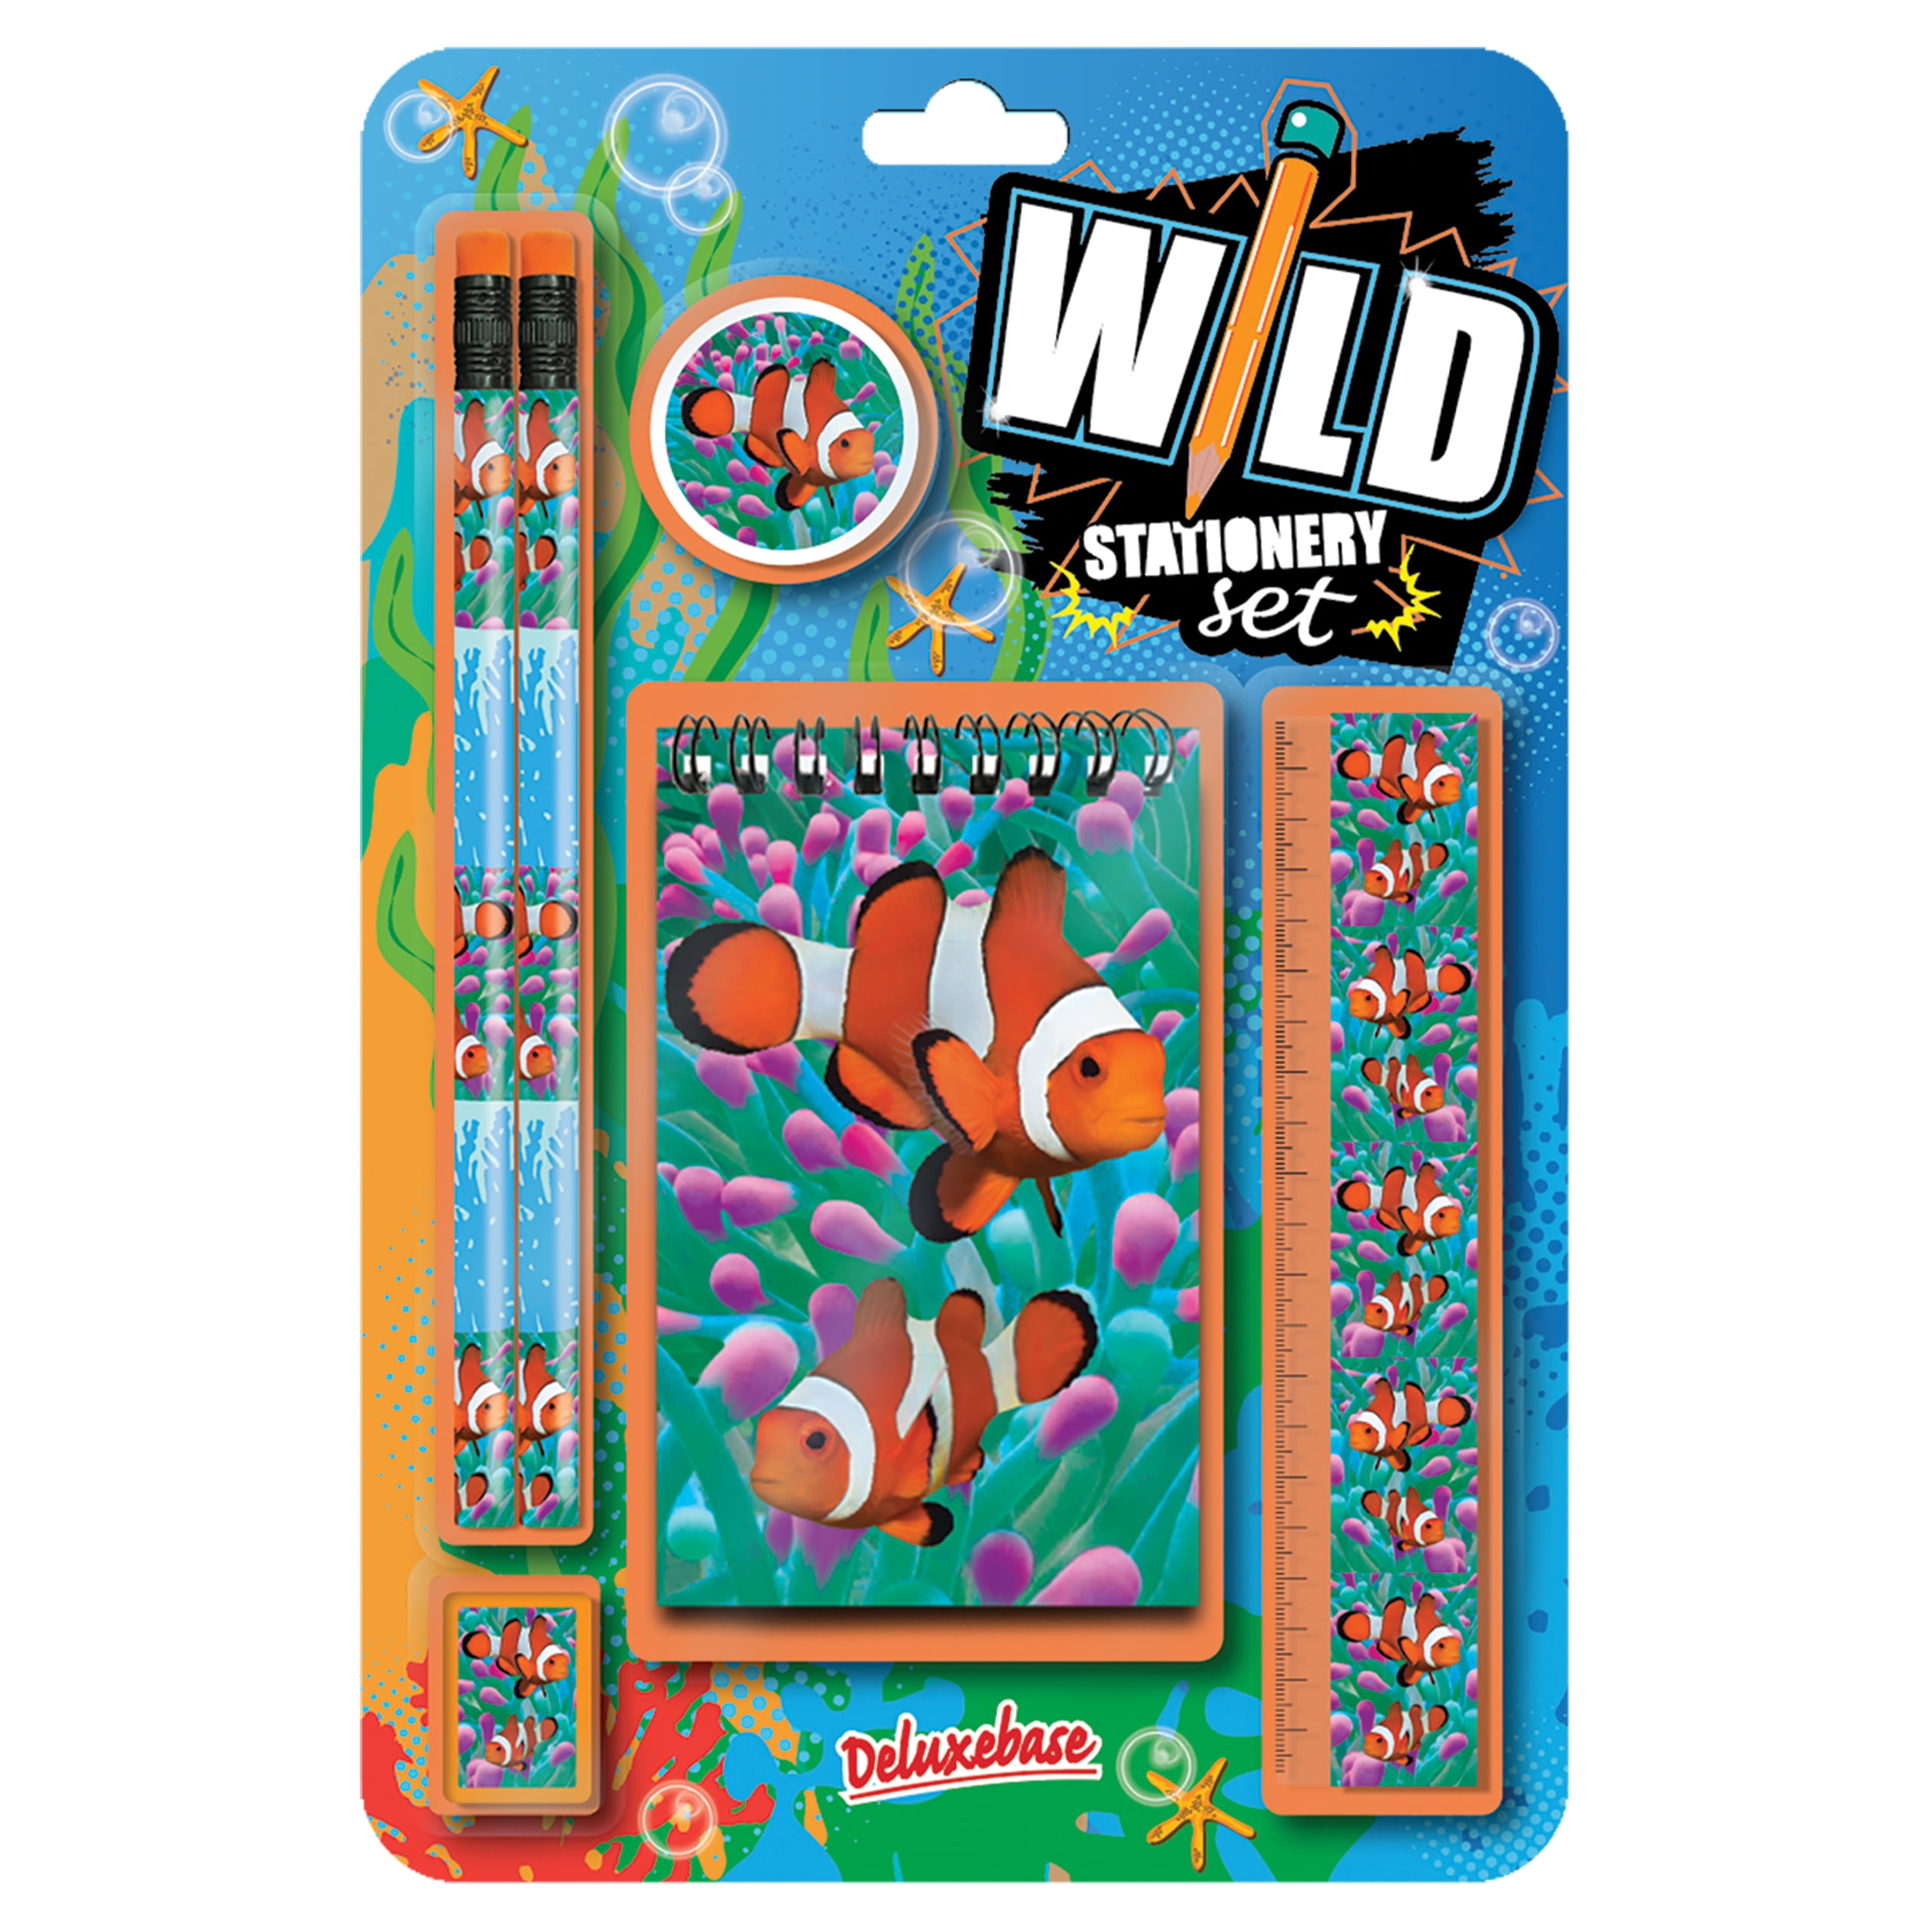 Wild Stationery Set - Lion School Stationary Sets from Deluxebase. School  Supplies Include 2 Pencils, Pencil Eraser, Pencil Sharpener, Ruler, and  Cute Notebook. Stationary Supplies Gifts for Kids - Walmart.com